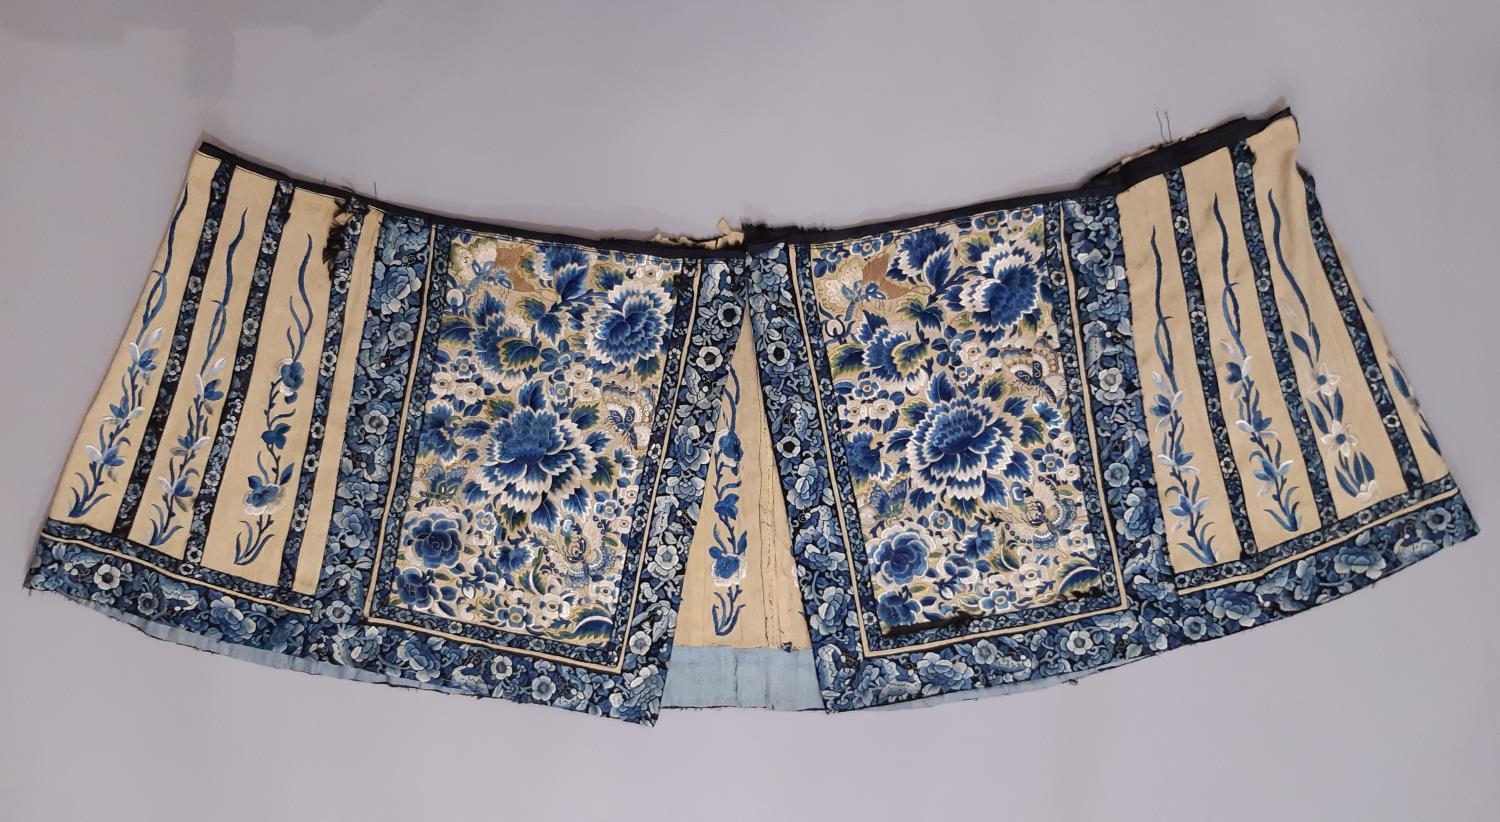 19th century Chinese lower section of skirt panel, with front sections heavily embroidered with